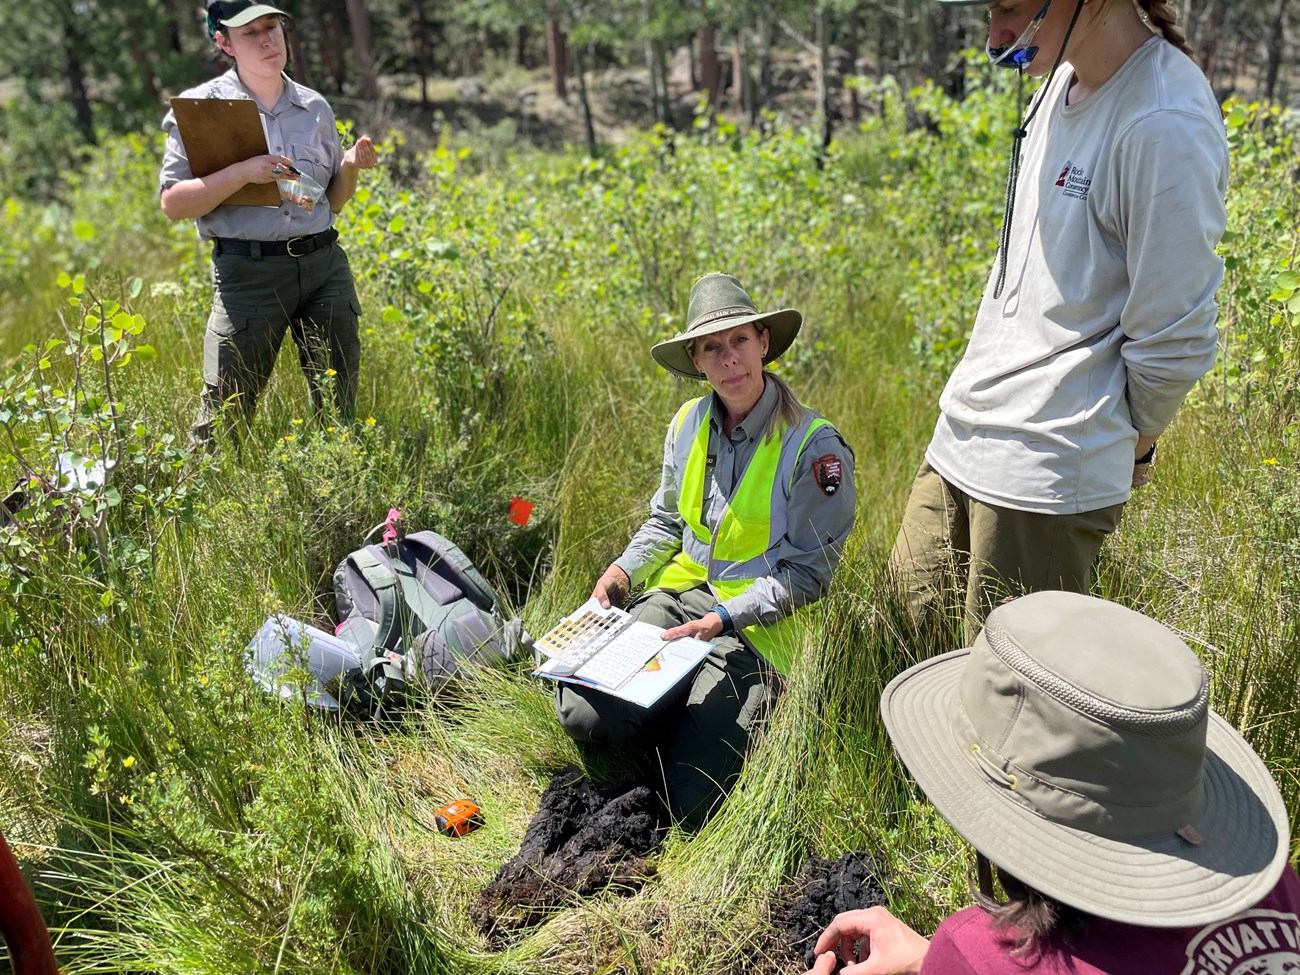 NPS employees are studying wetlands areas of RMNP